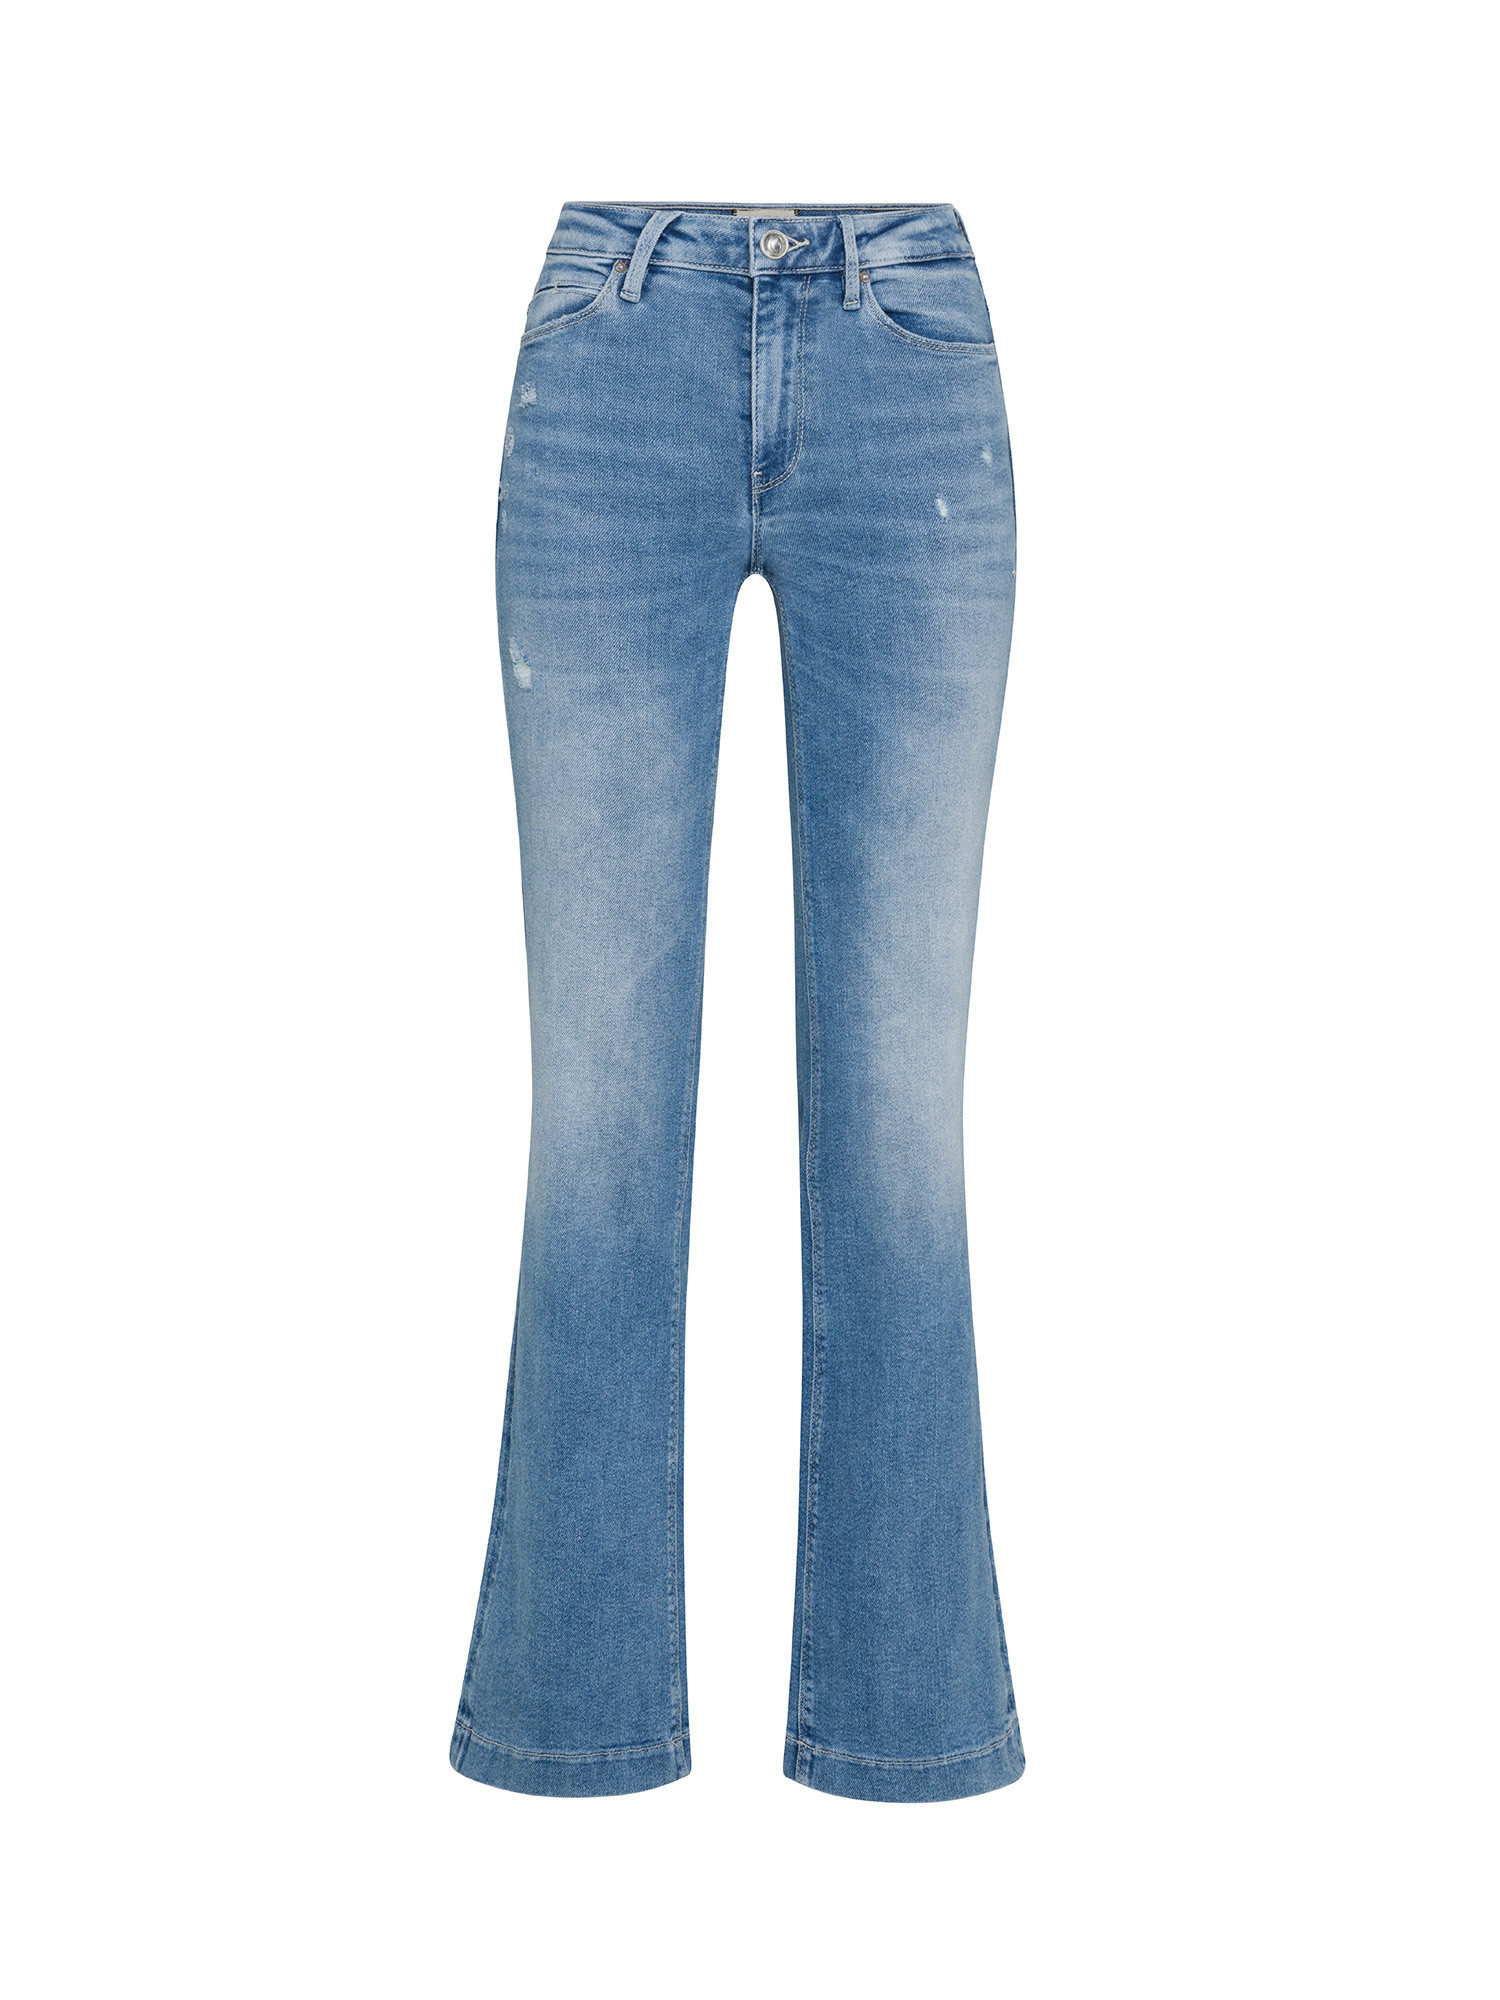 Guess - Jeans 5 tasche bootcut, Denim, large image number 0